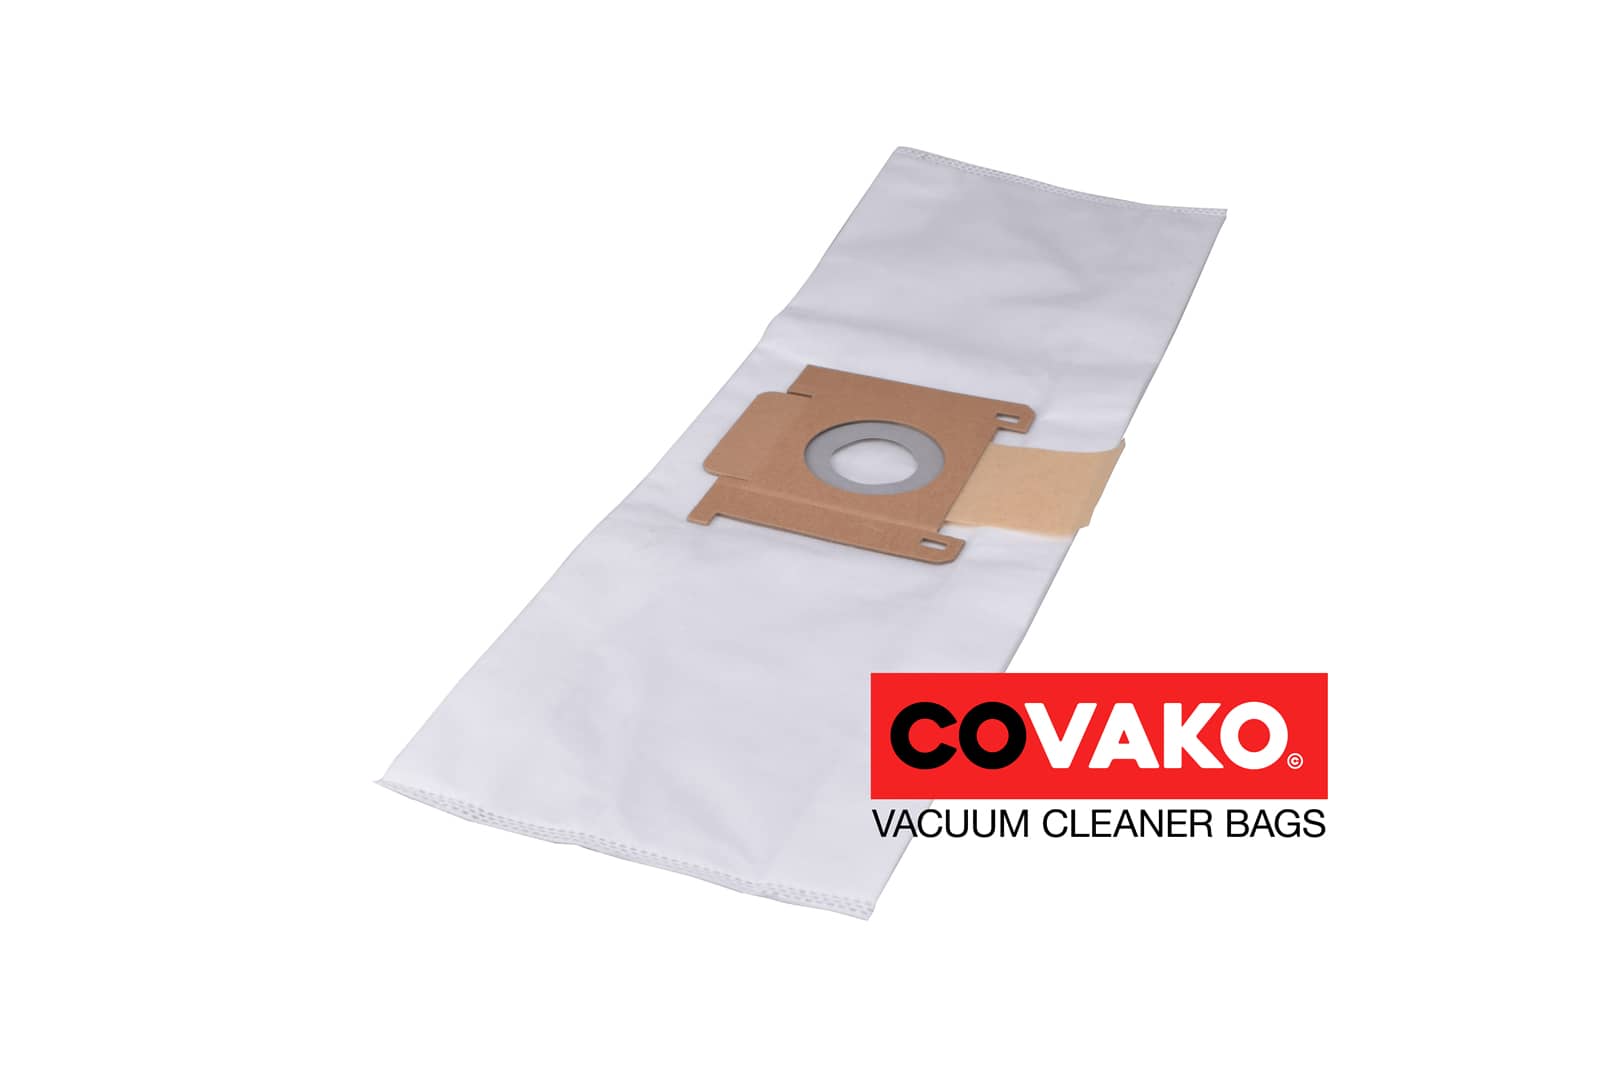 Oehme Otto i-vac C5 / Synthesis - Oehme Otto vacuum cleaner bags